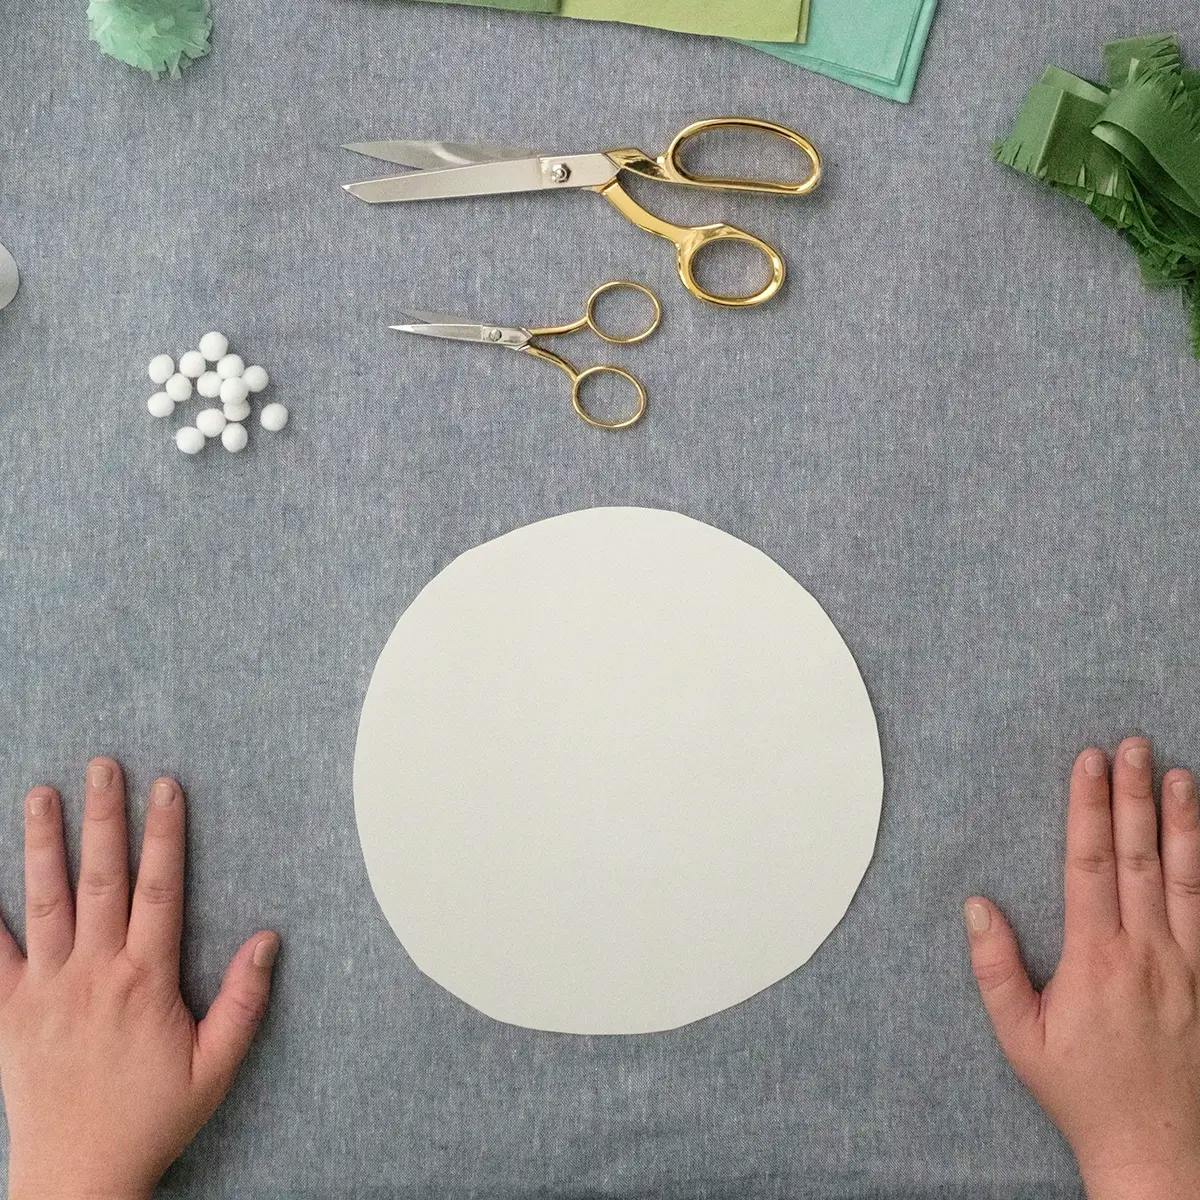 Paper circles traced from bowls - the start of a tutorial on creating a DIY paper Christmas tree.